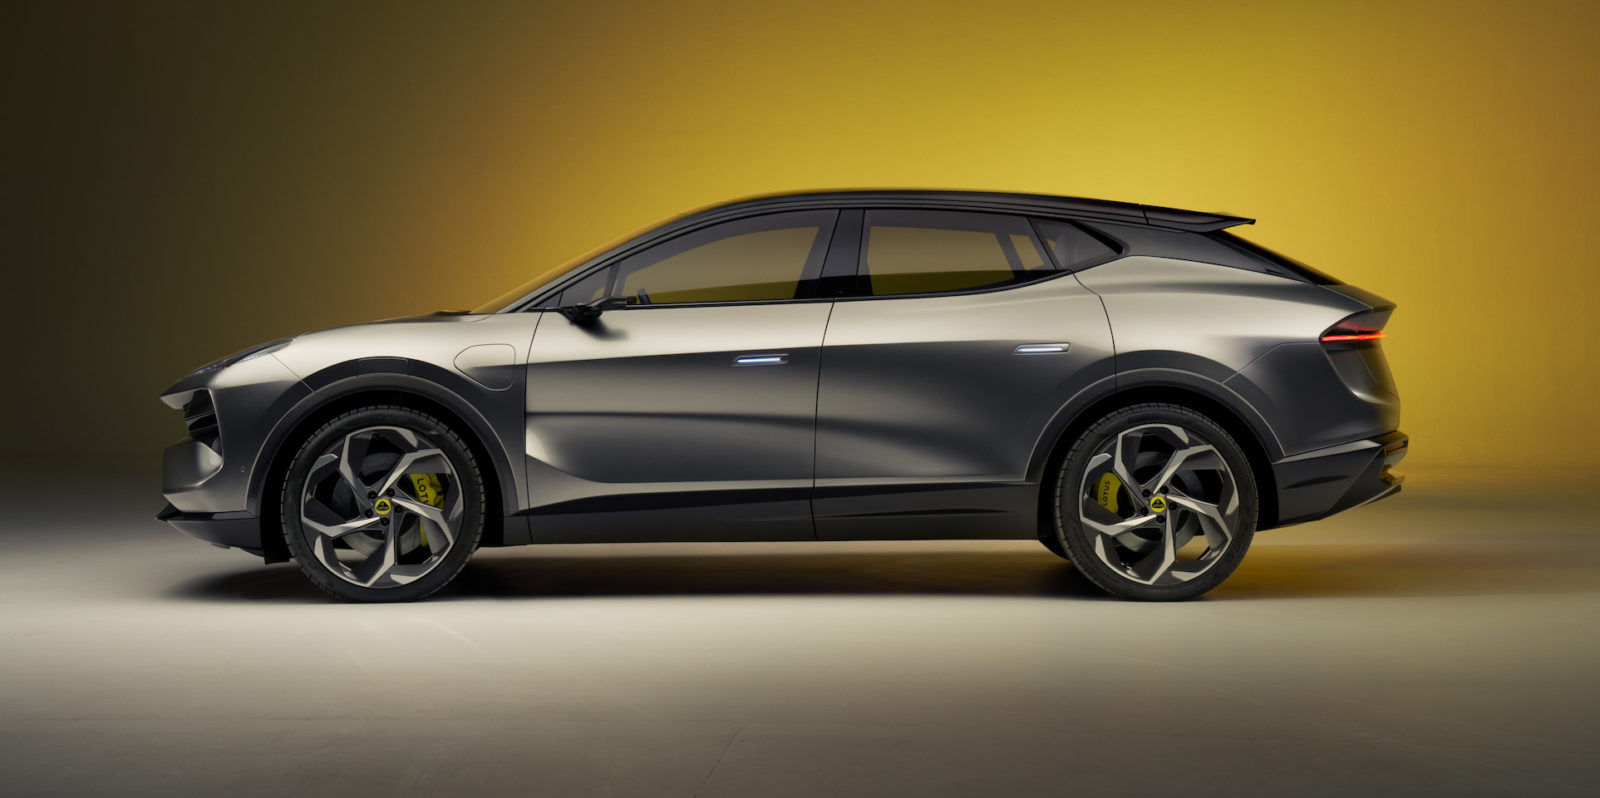 Lotus makes history with Eletre, the world’s first electric hyper-SUV